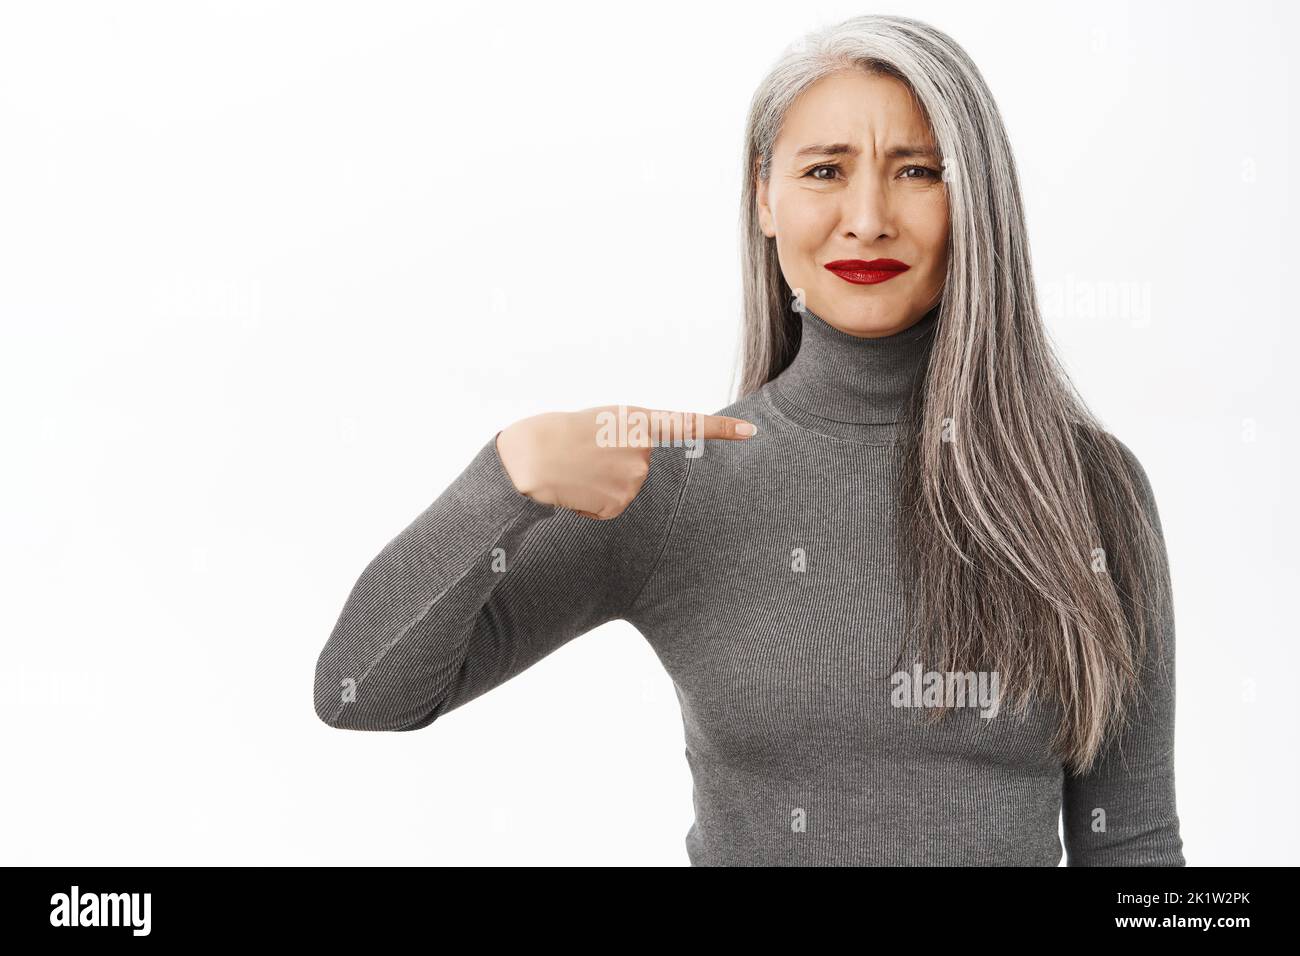 Beautiful asian senior woman looking reluctant, pointing at herself with skeptical face, frowning and grimacing, standing over white background. Stock Photo